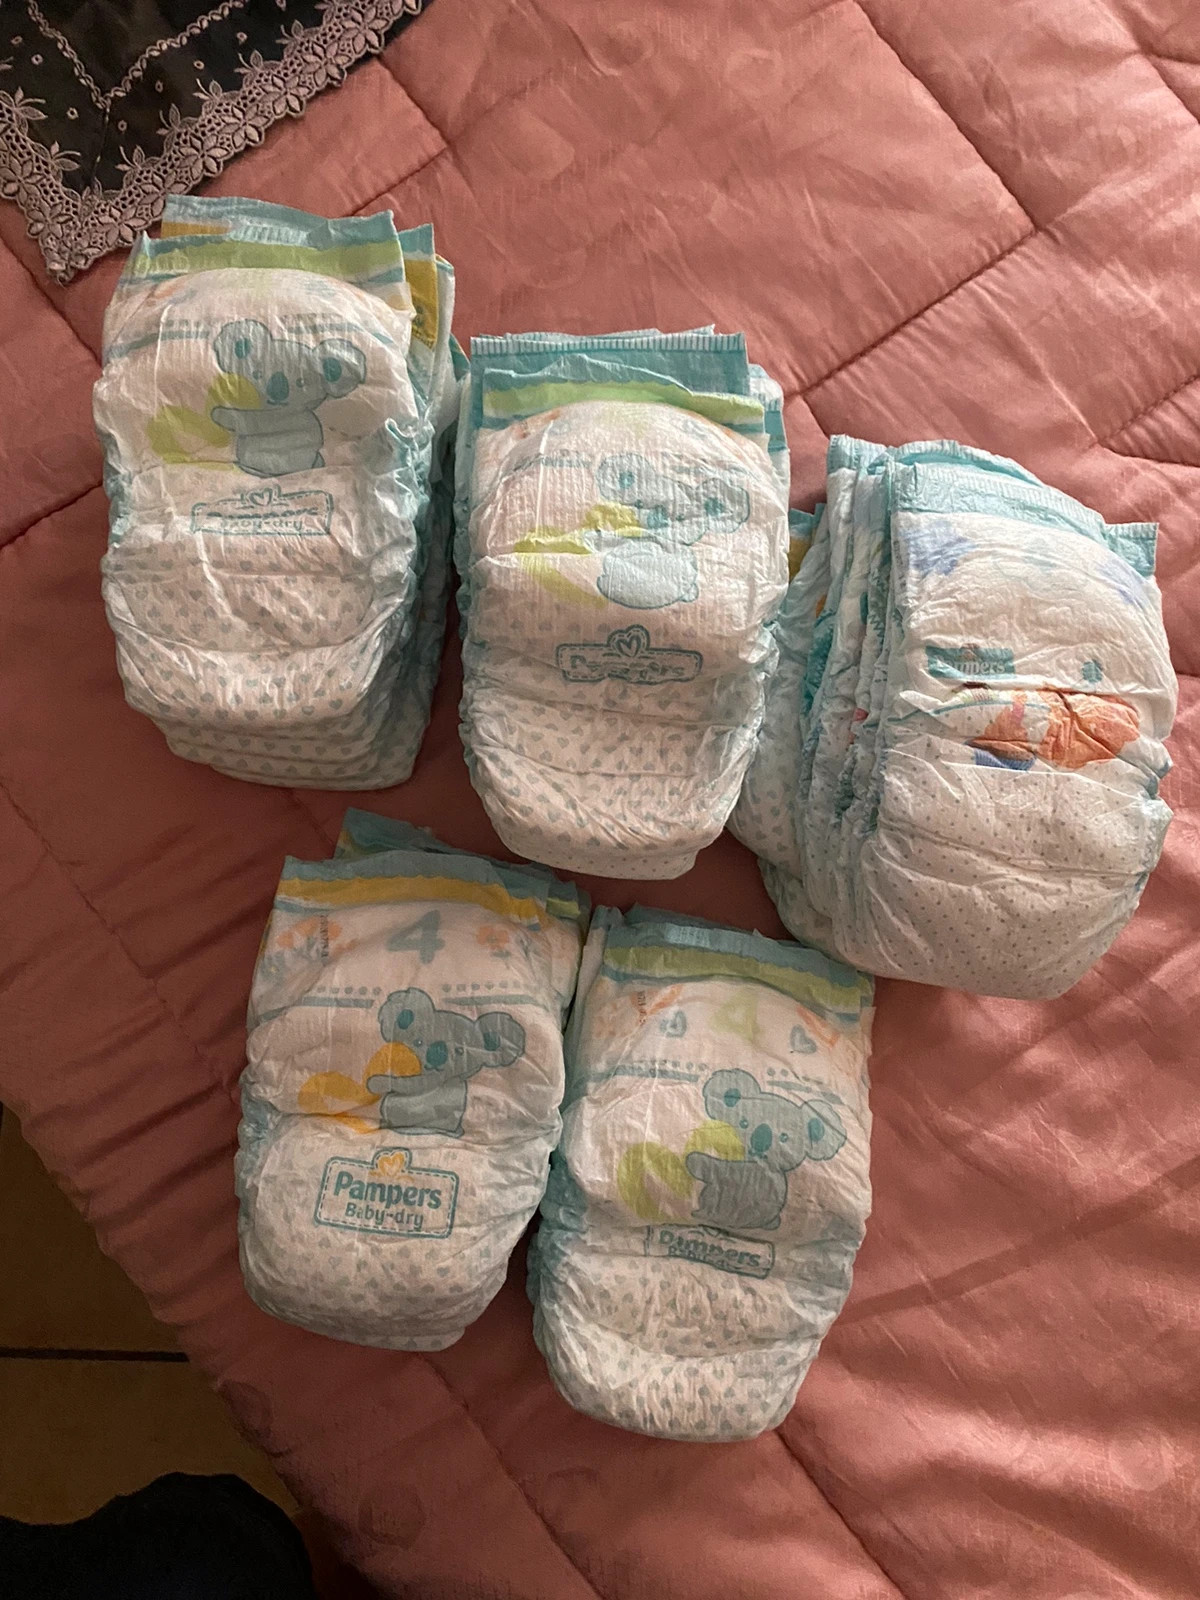 148 COUCHES PAMPERS BABY DRY Taille 2 (4 - 8 kg) NEUF